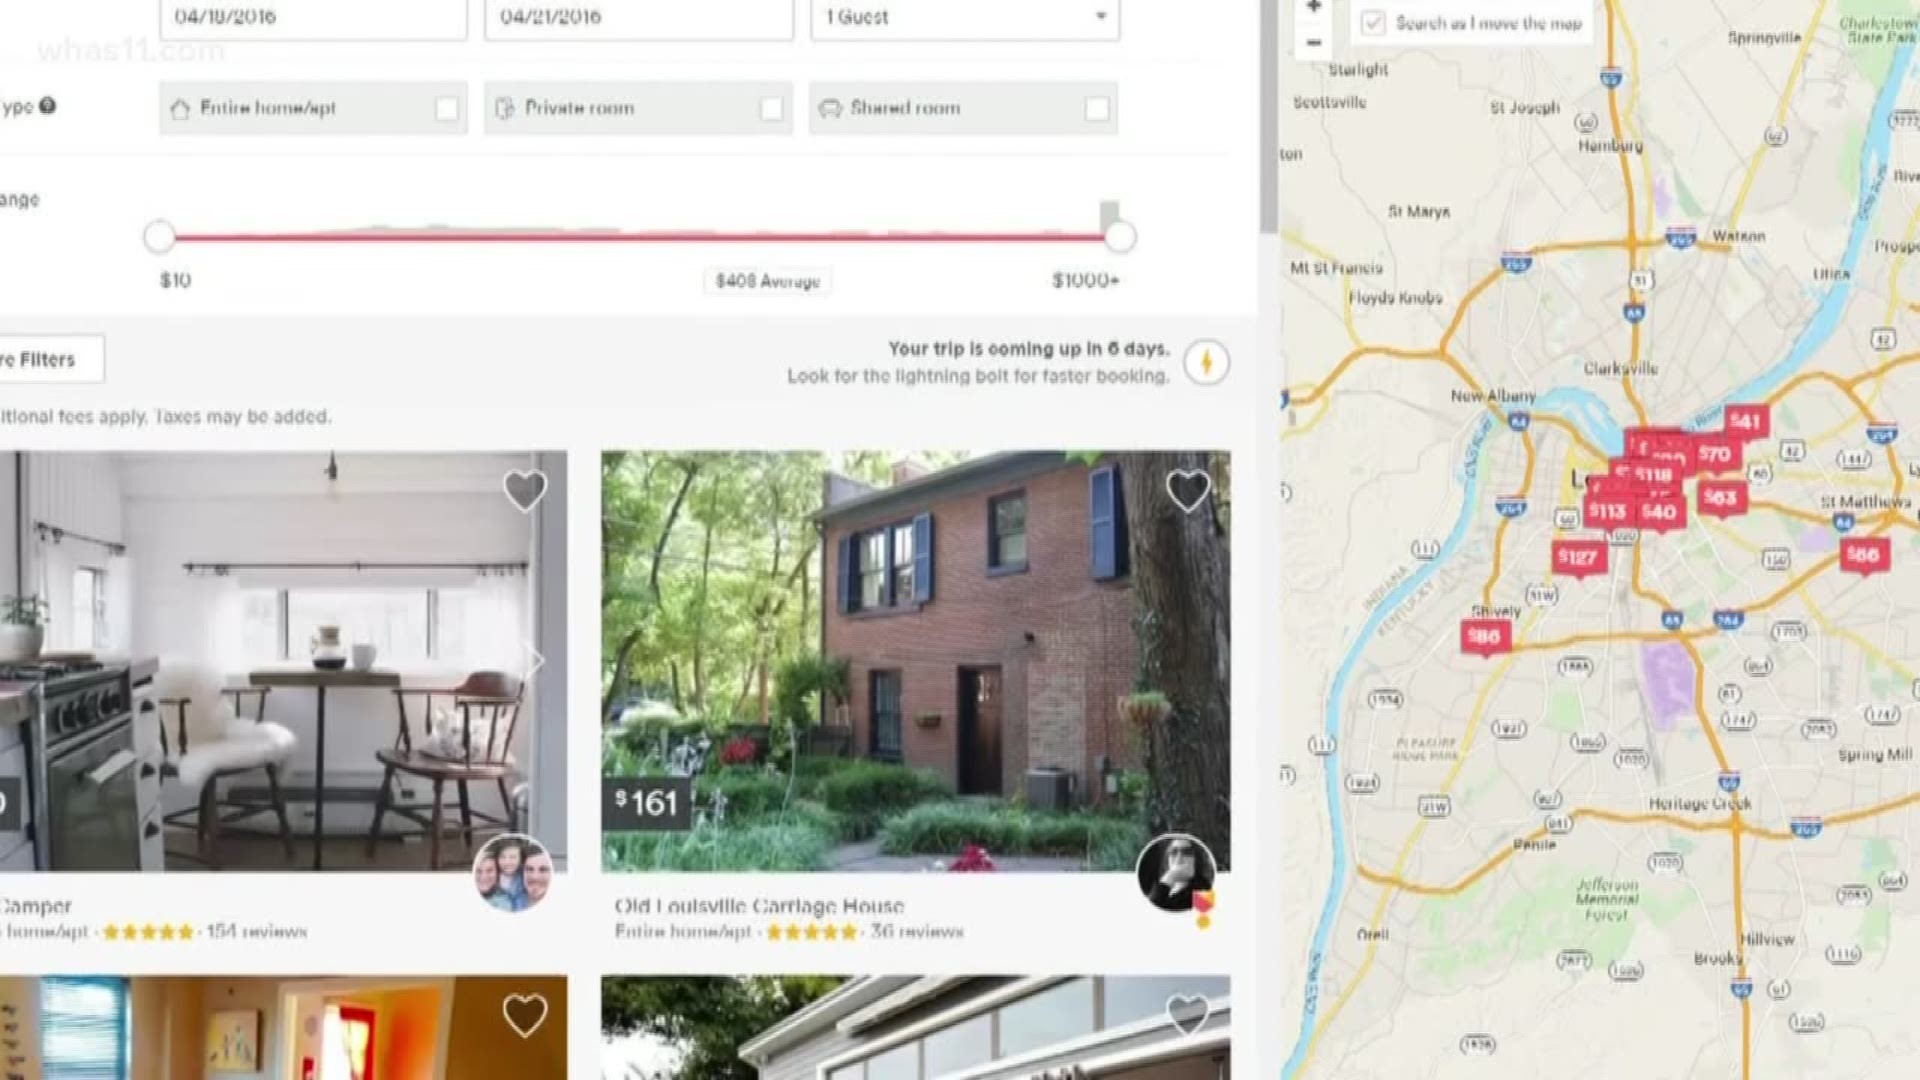 Big Changes to Louisville's short-term rentals could take effect soon and it's leaving Louisville Airbnb hosts worried as the busiest rental season of the year is upon us.